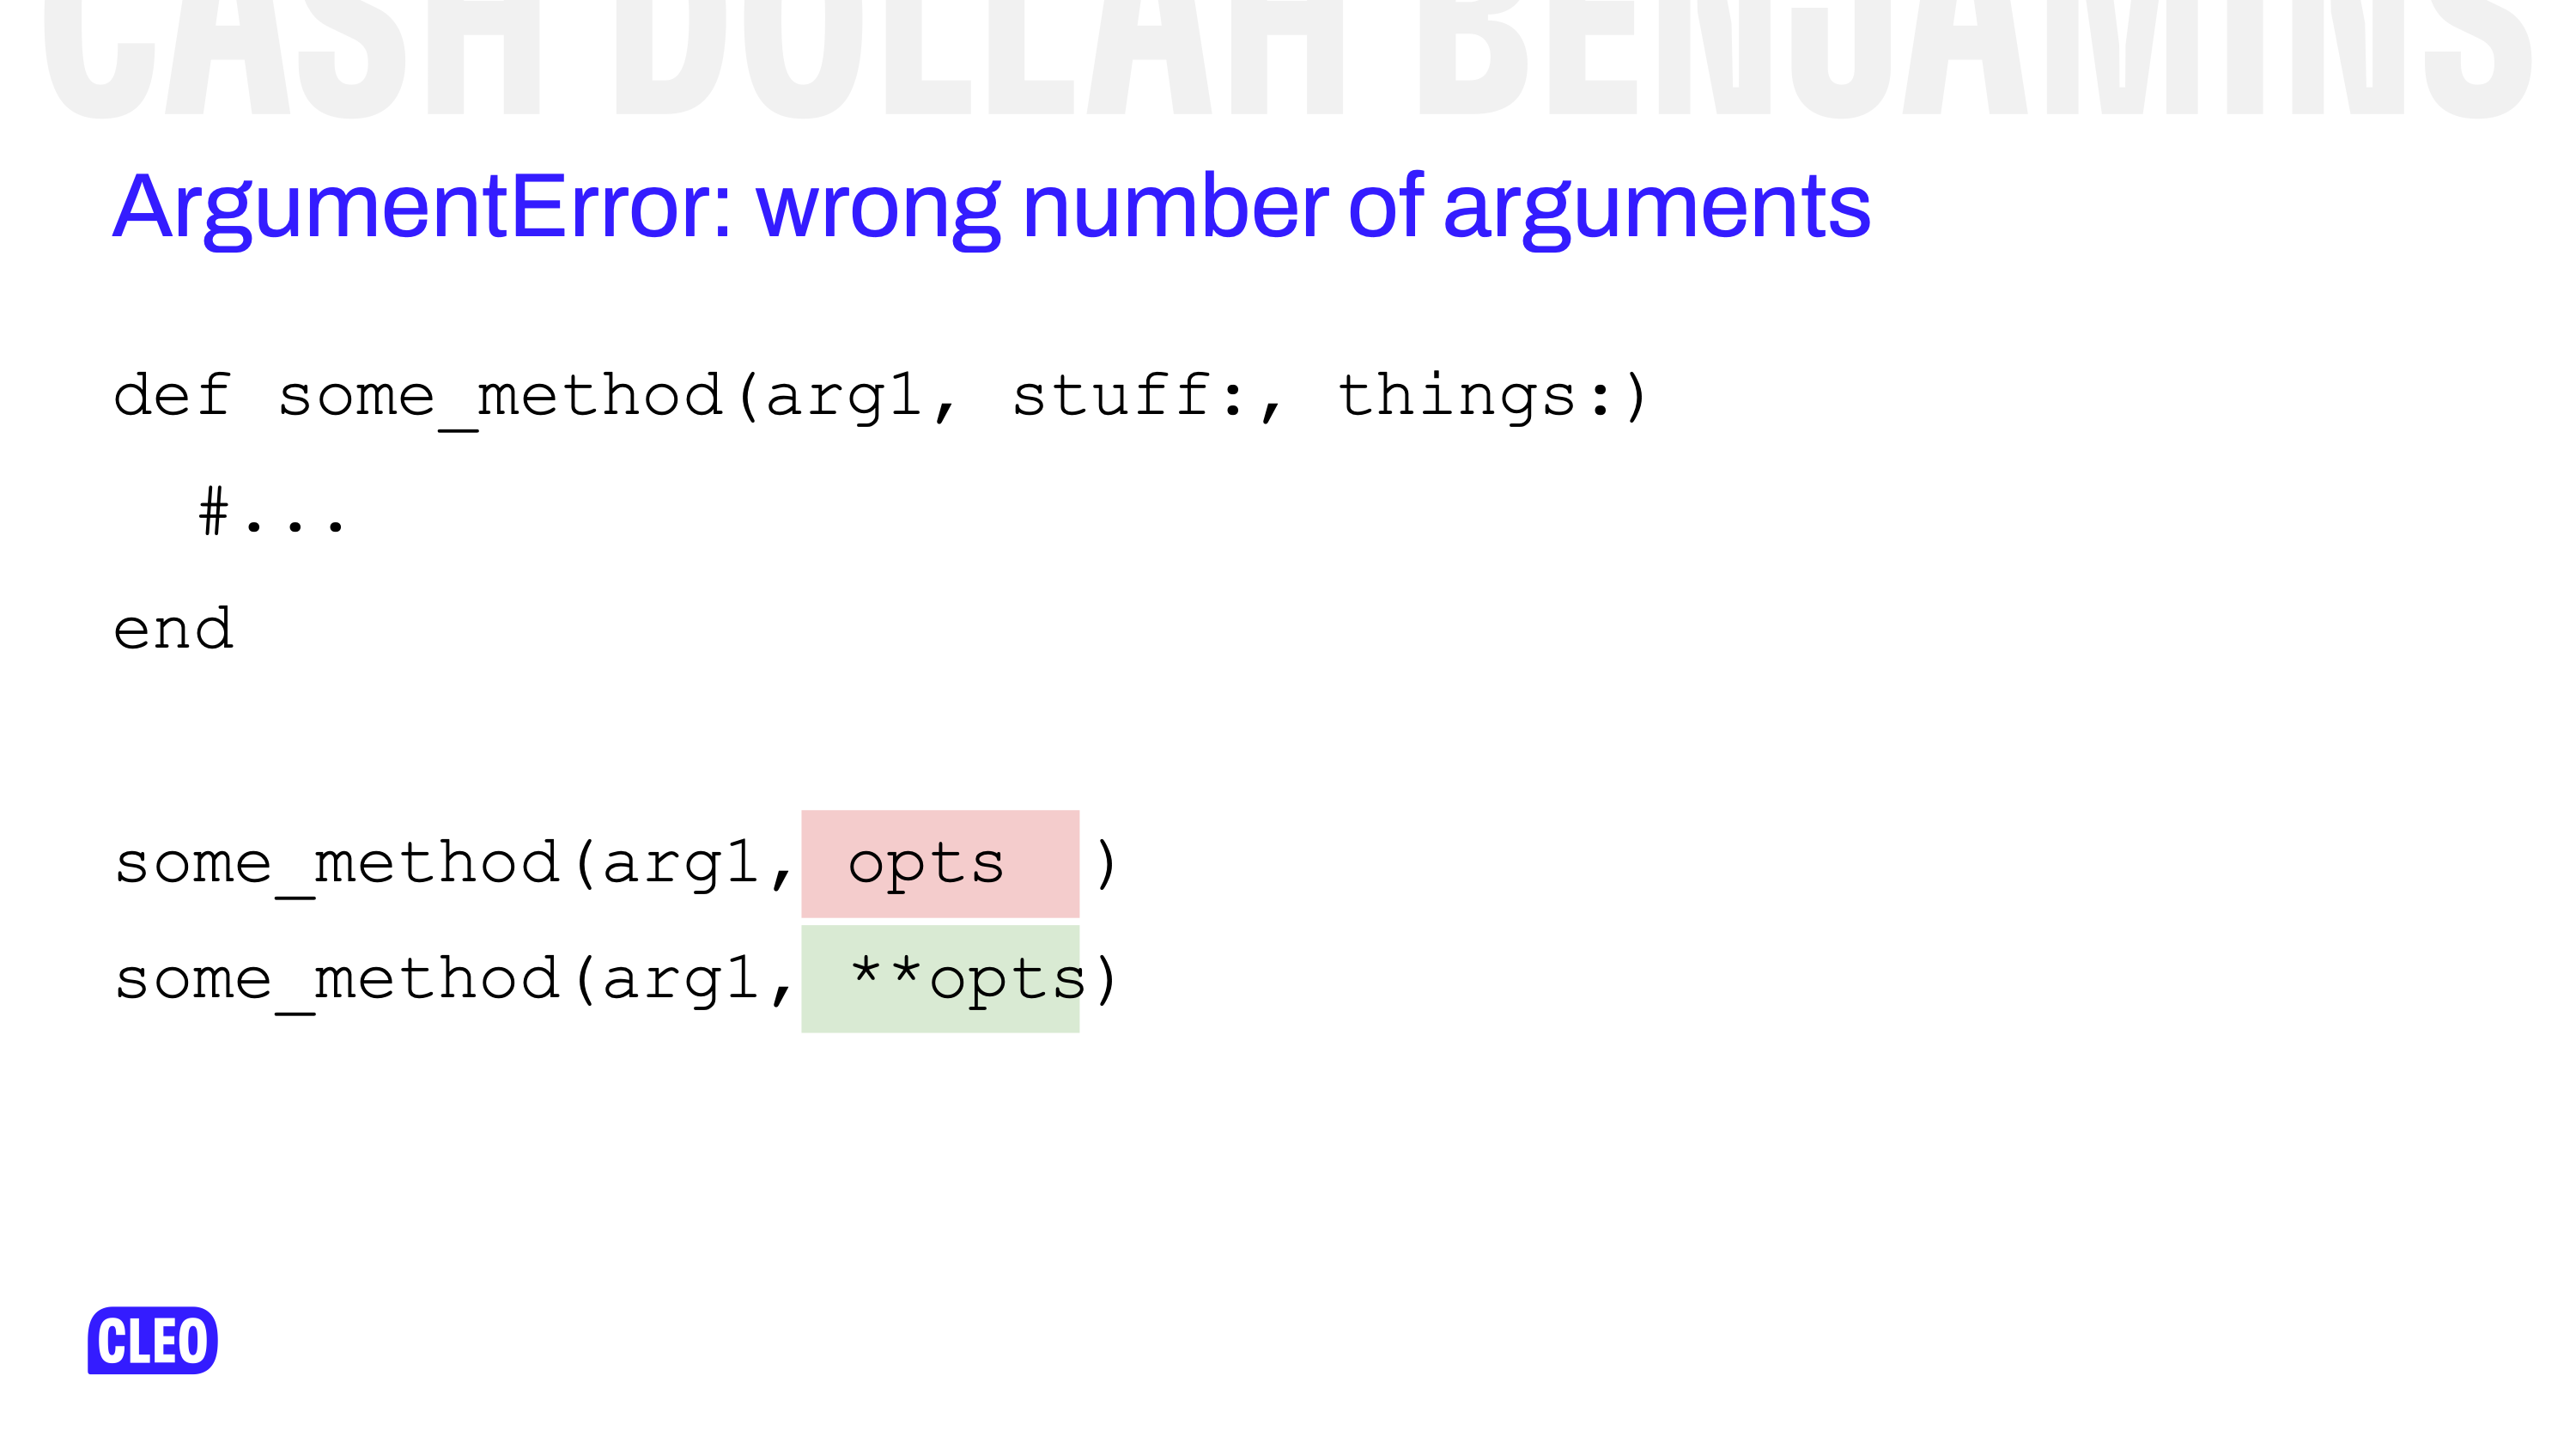 an example of the common fix we had to make to make our code ruby 3 compatible - changing the last hash into a double splatted hash to cope with ruby 3 keywords, text: ArgumentError: wrong number of arguments, def some_method(arg1, stuff:, things:) #... end some_method(arg1, opts) vs. some_method(arg1, **opts)